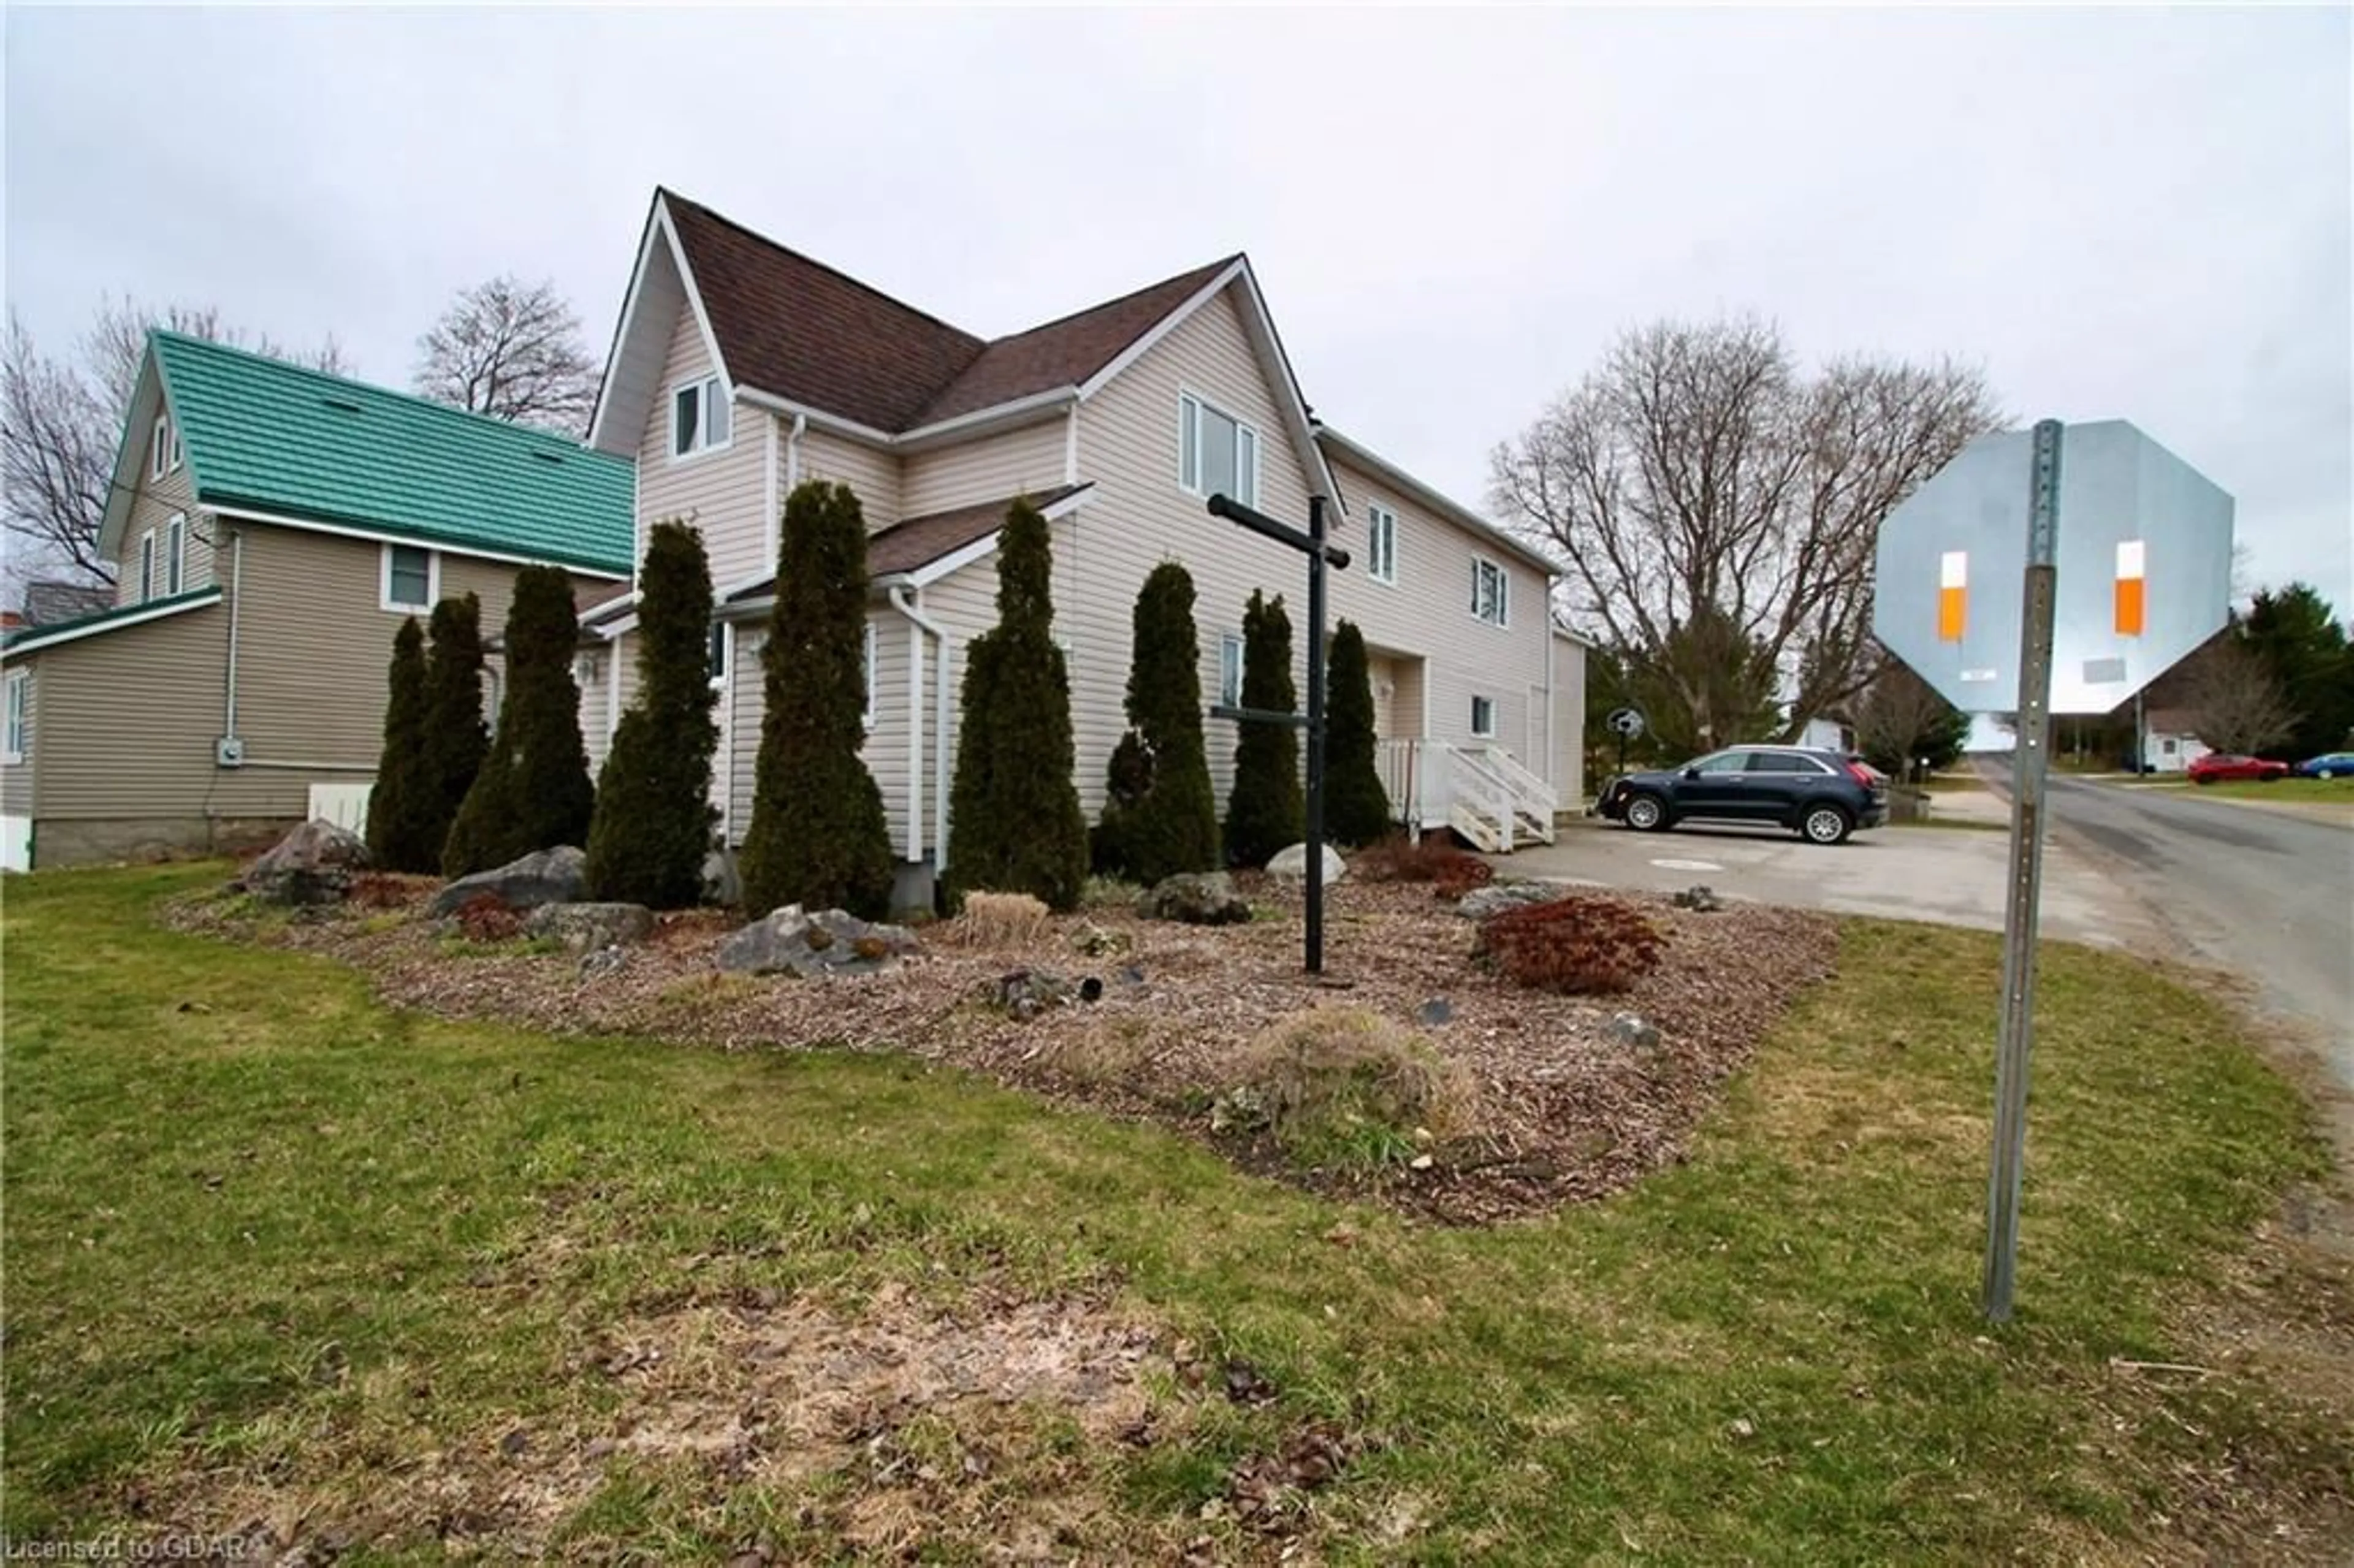 Outside view for 88 Main Street St, Lion's Head Ontario N0H 1W0